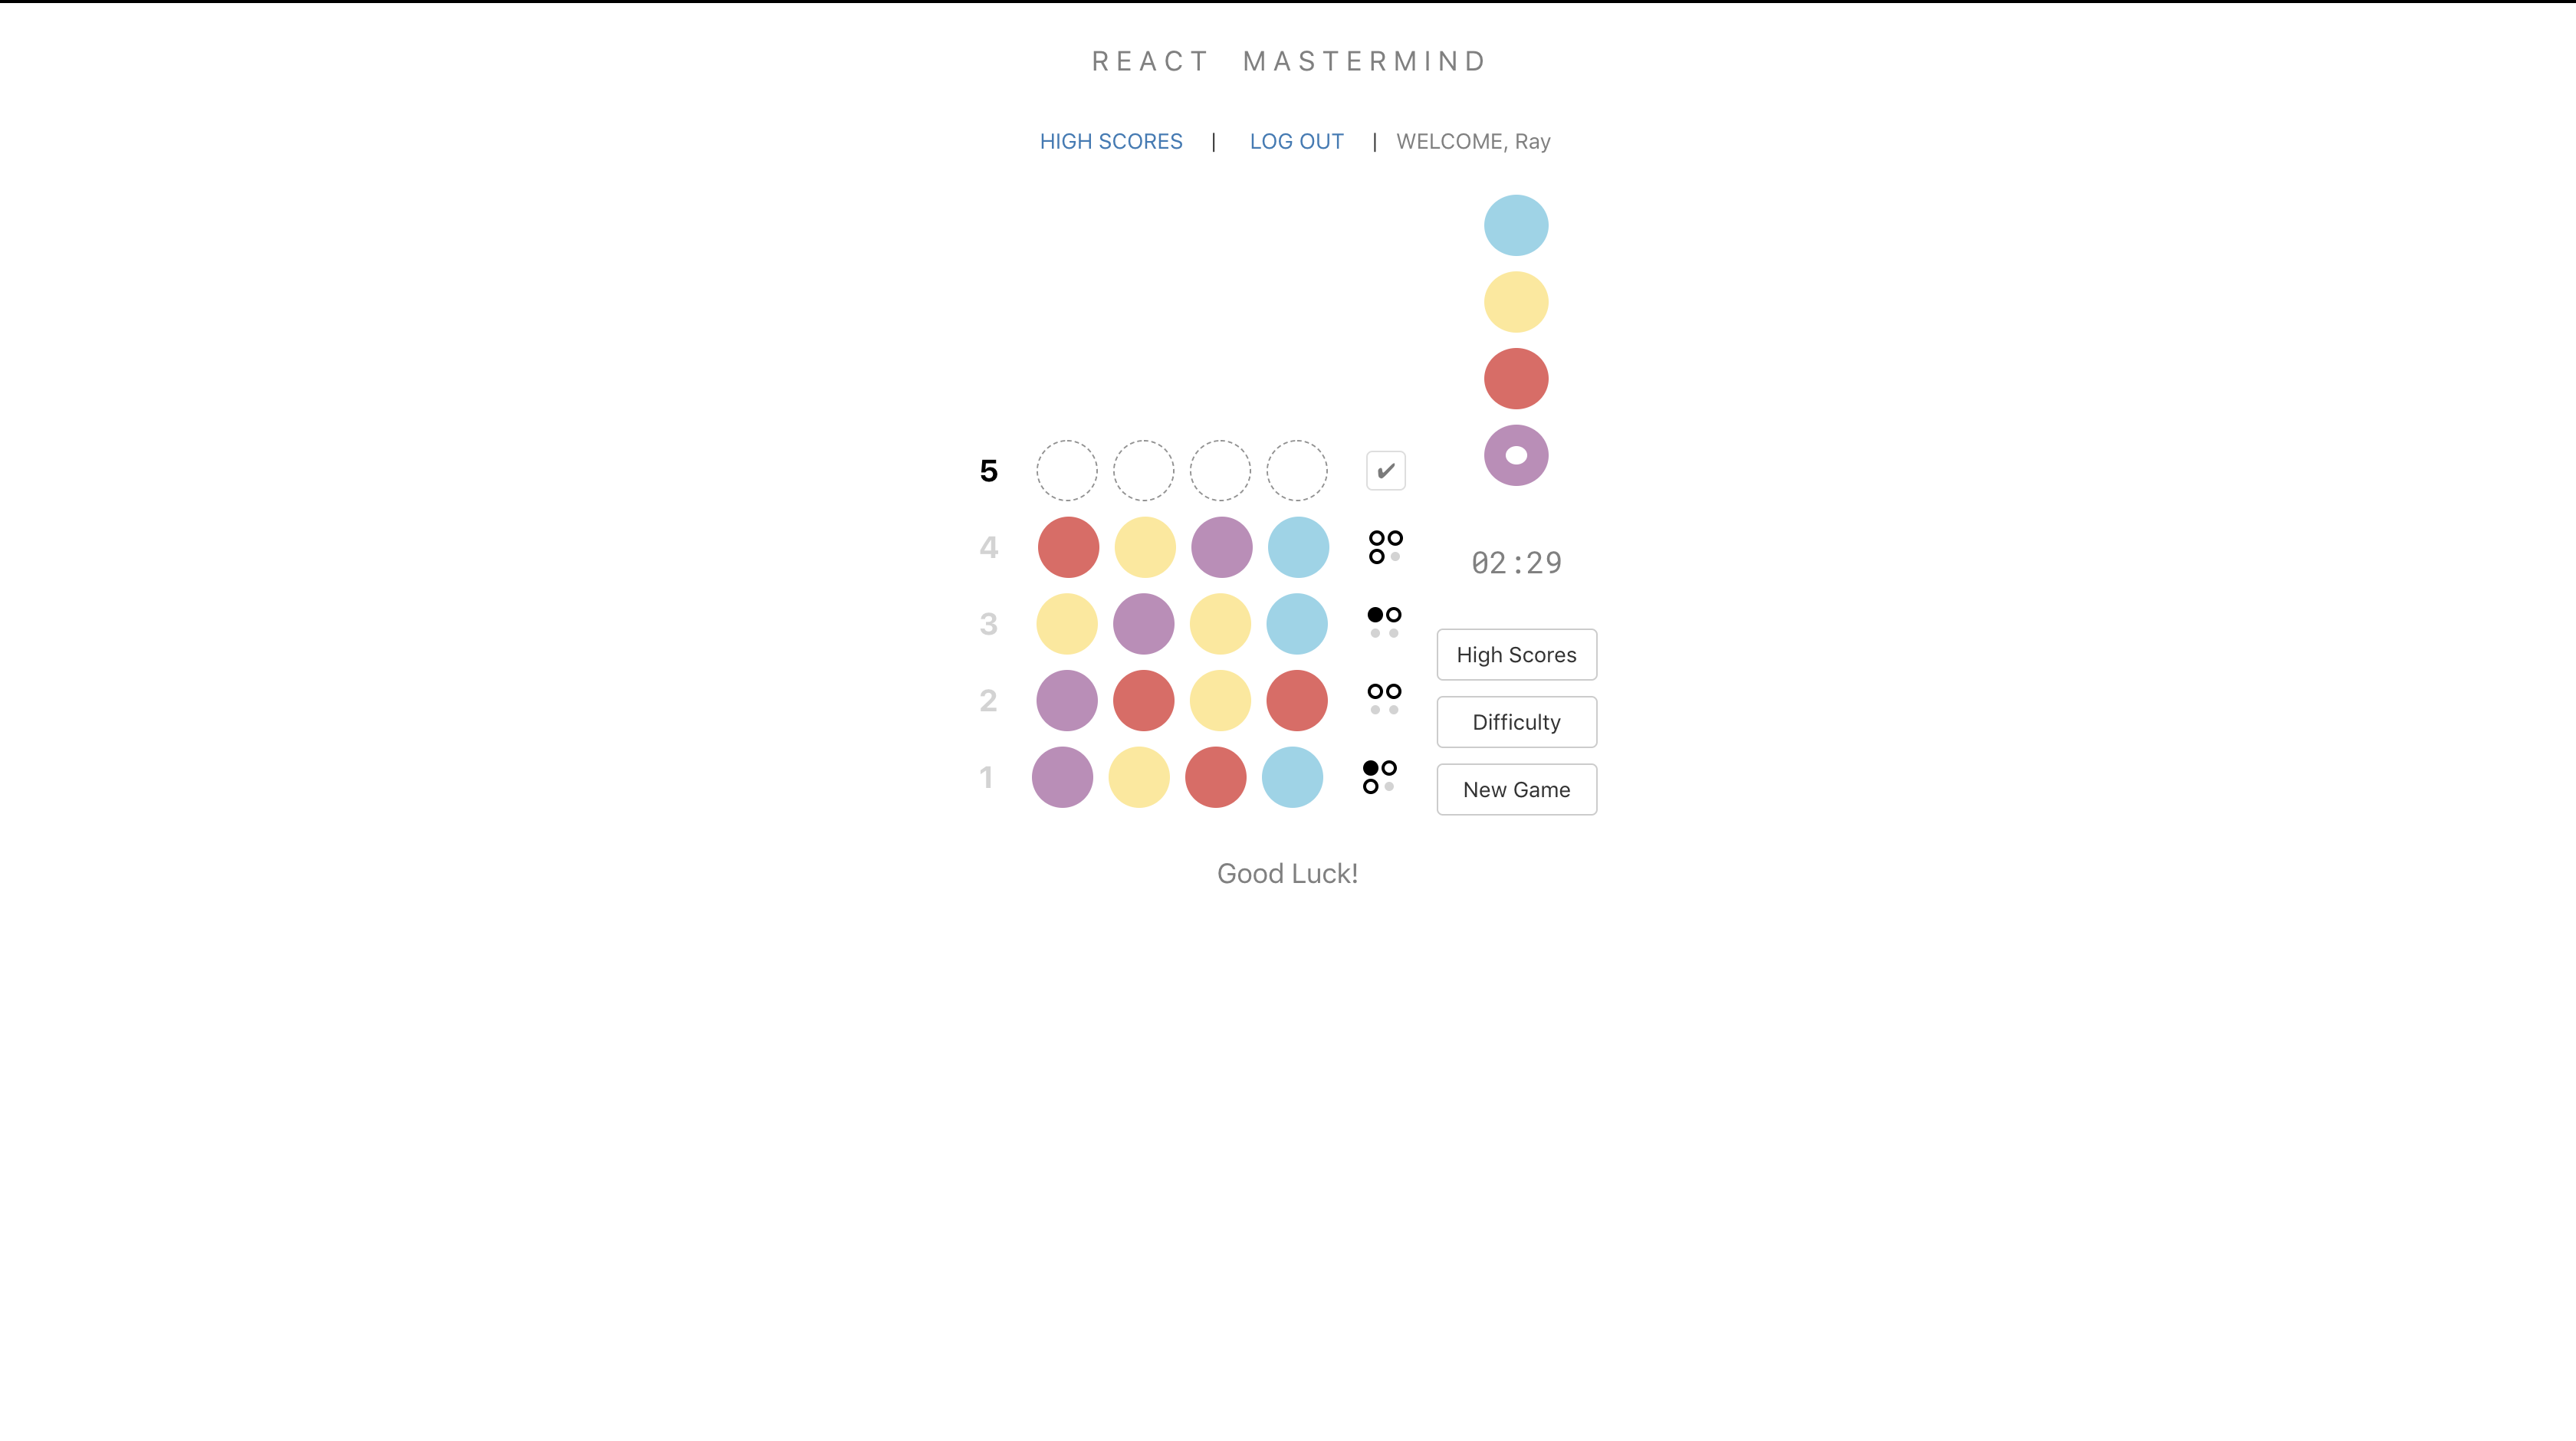 <h2>React Mastermind App</h2> - A React.js game based off the 1973 board game Mastermind. You are able to log high scores and choose your difficulty. 
                    The object of the game is to guess the color and pattern combination in enough tries and as quickly as possible.
                    This app used the full MERN stack of Mongoose, Express, React and Node as well as Javascript and game logic.<br>
                    <a target="_blank" href="https://github.com/rayplaza/mastermind">Github Link</a>